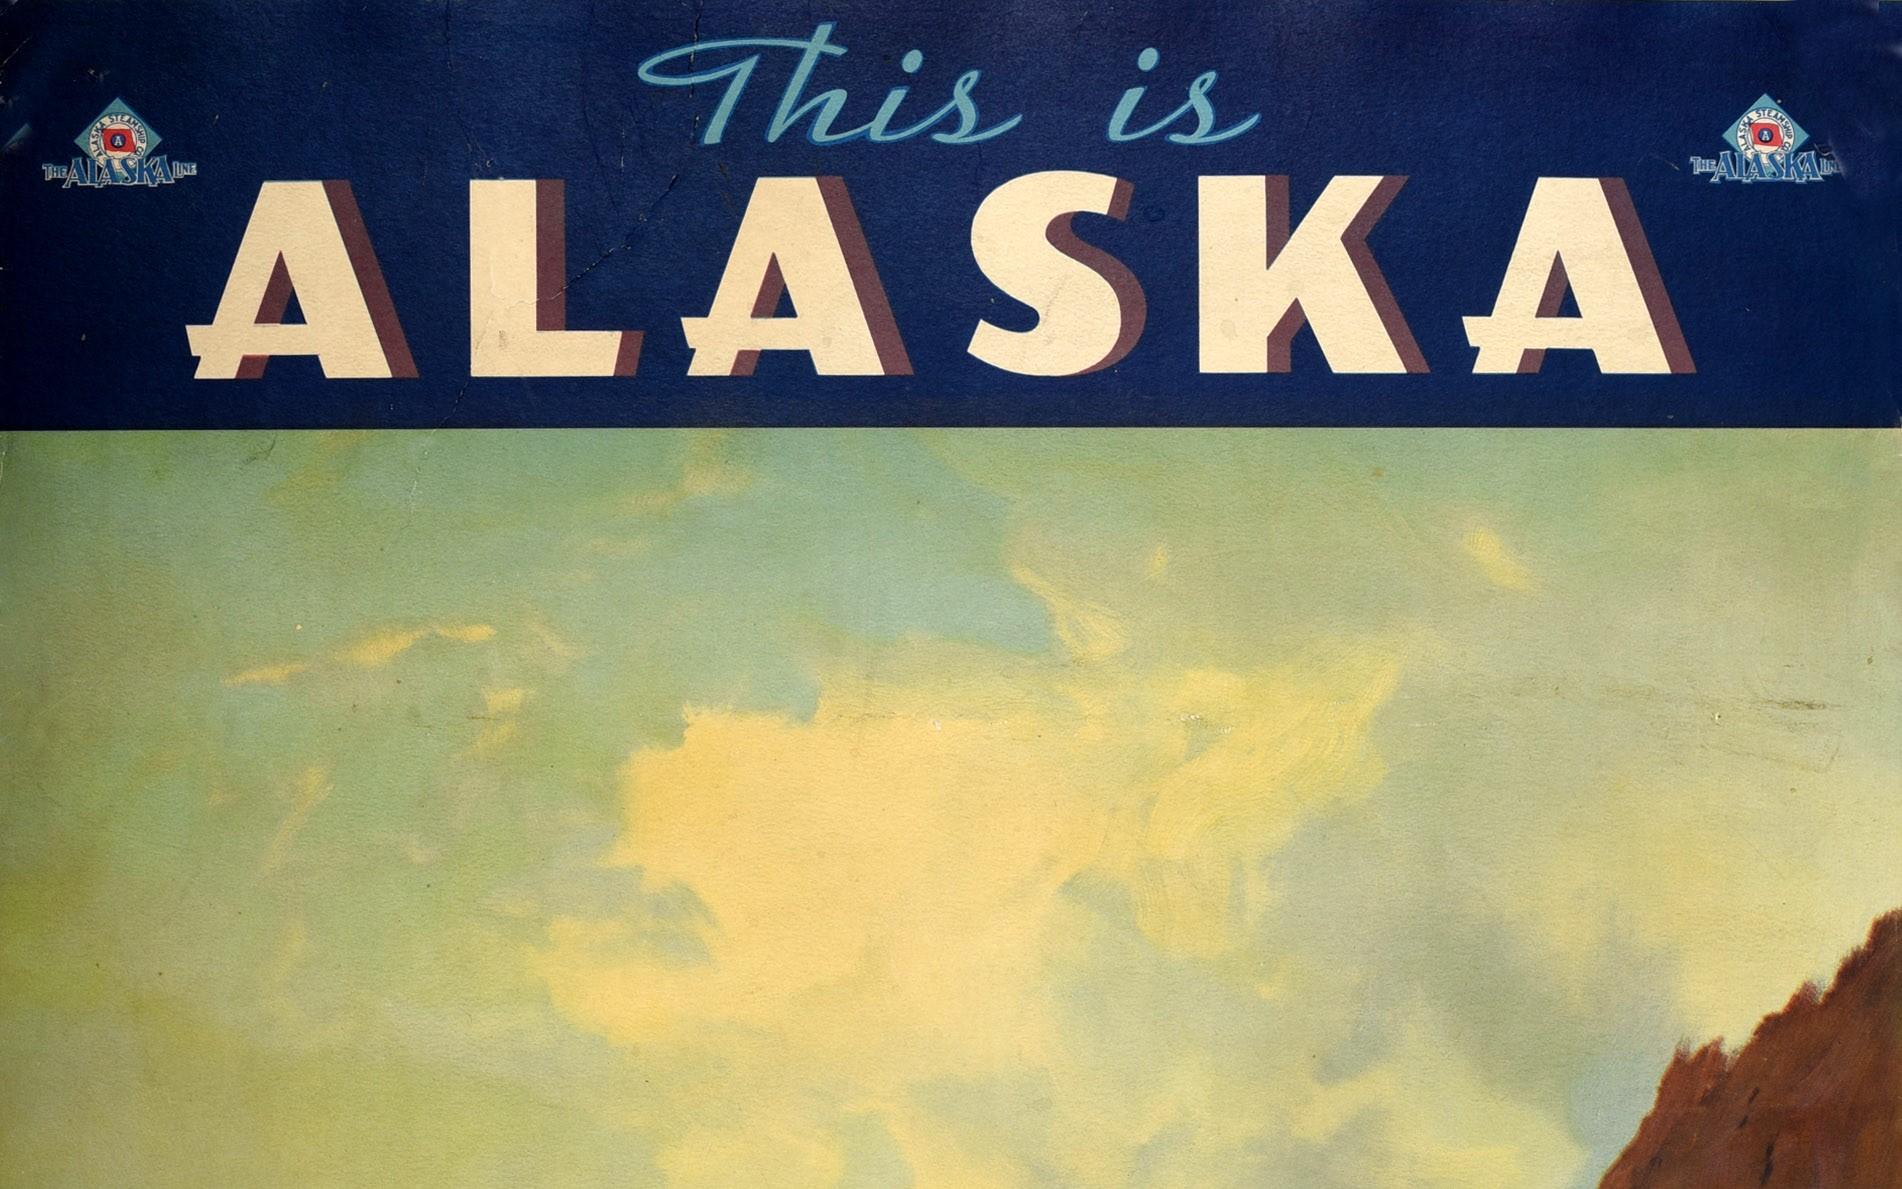 Original vintage travel poster - This is Alaska - issued by The Alaska Line and featuring a scenic painting by Sydney Laurence (1865-1940) entitled Along Alaska's Sheltered Seas depicting a steamboat with bird flying low over the water in a valley